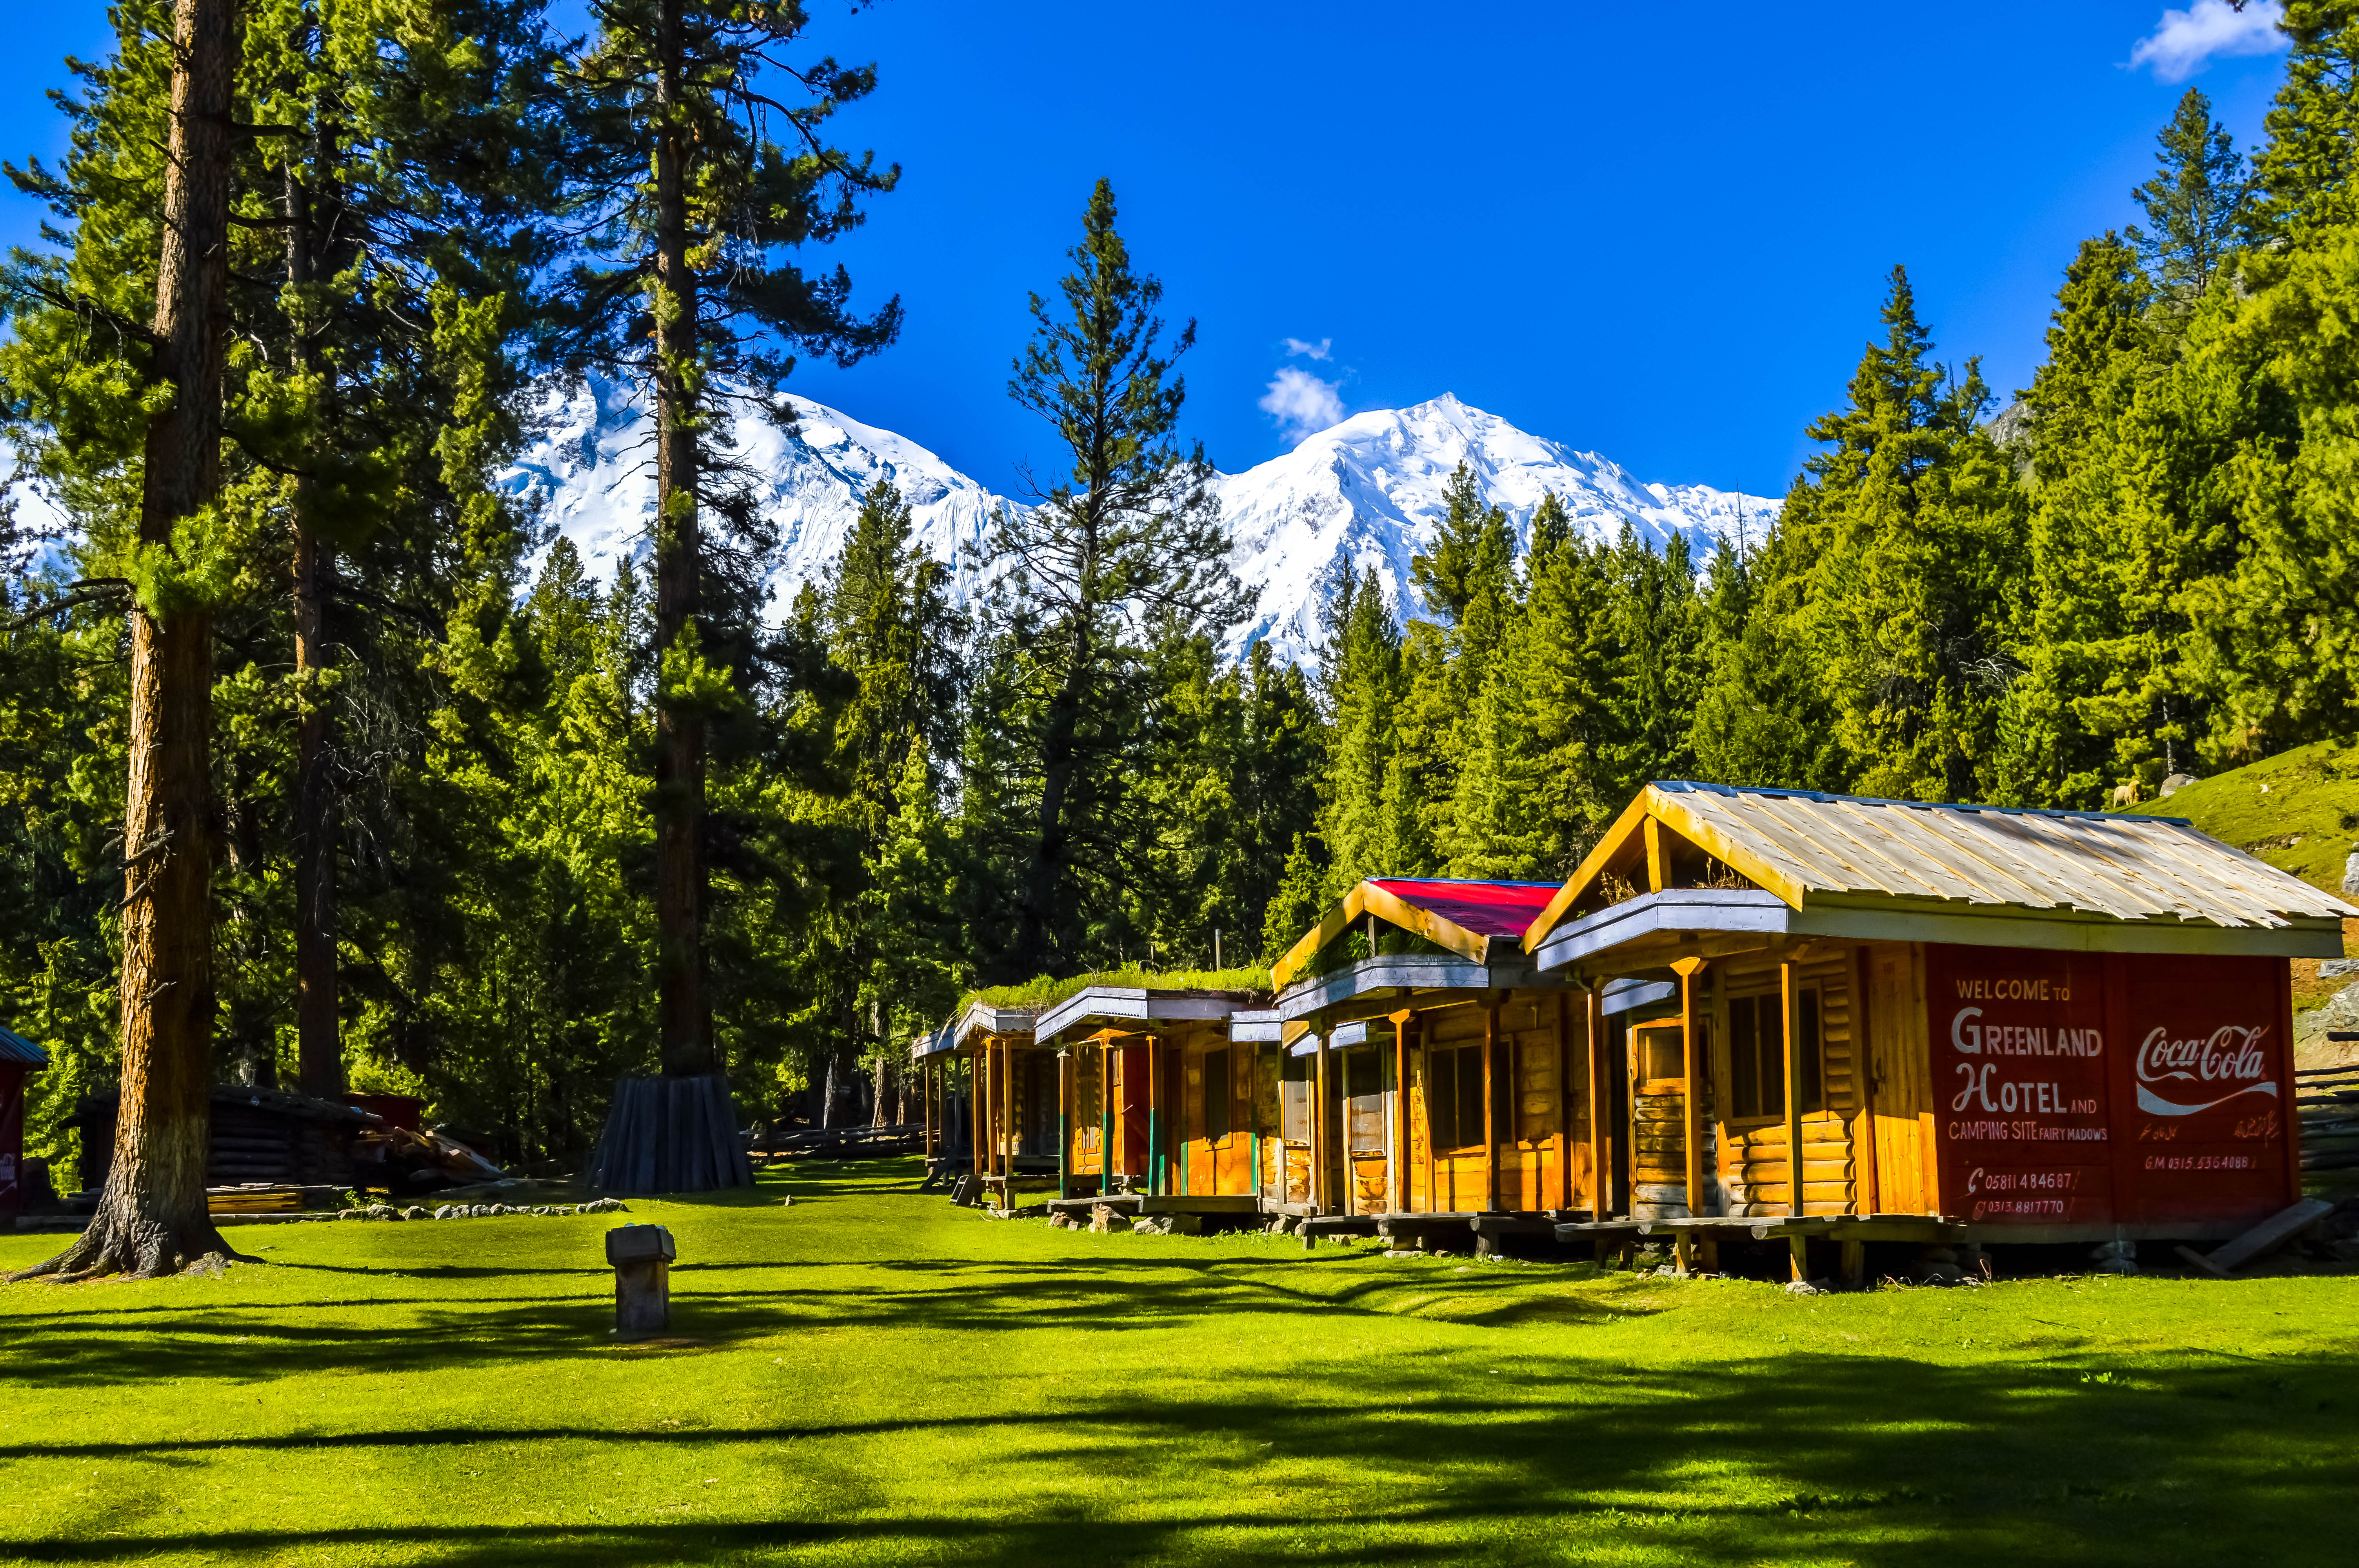 File:Fairy Meadows Cottages, Pakistan.jpg - Wikimedia Commons